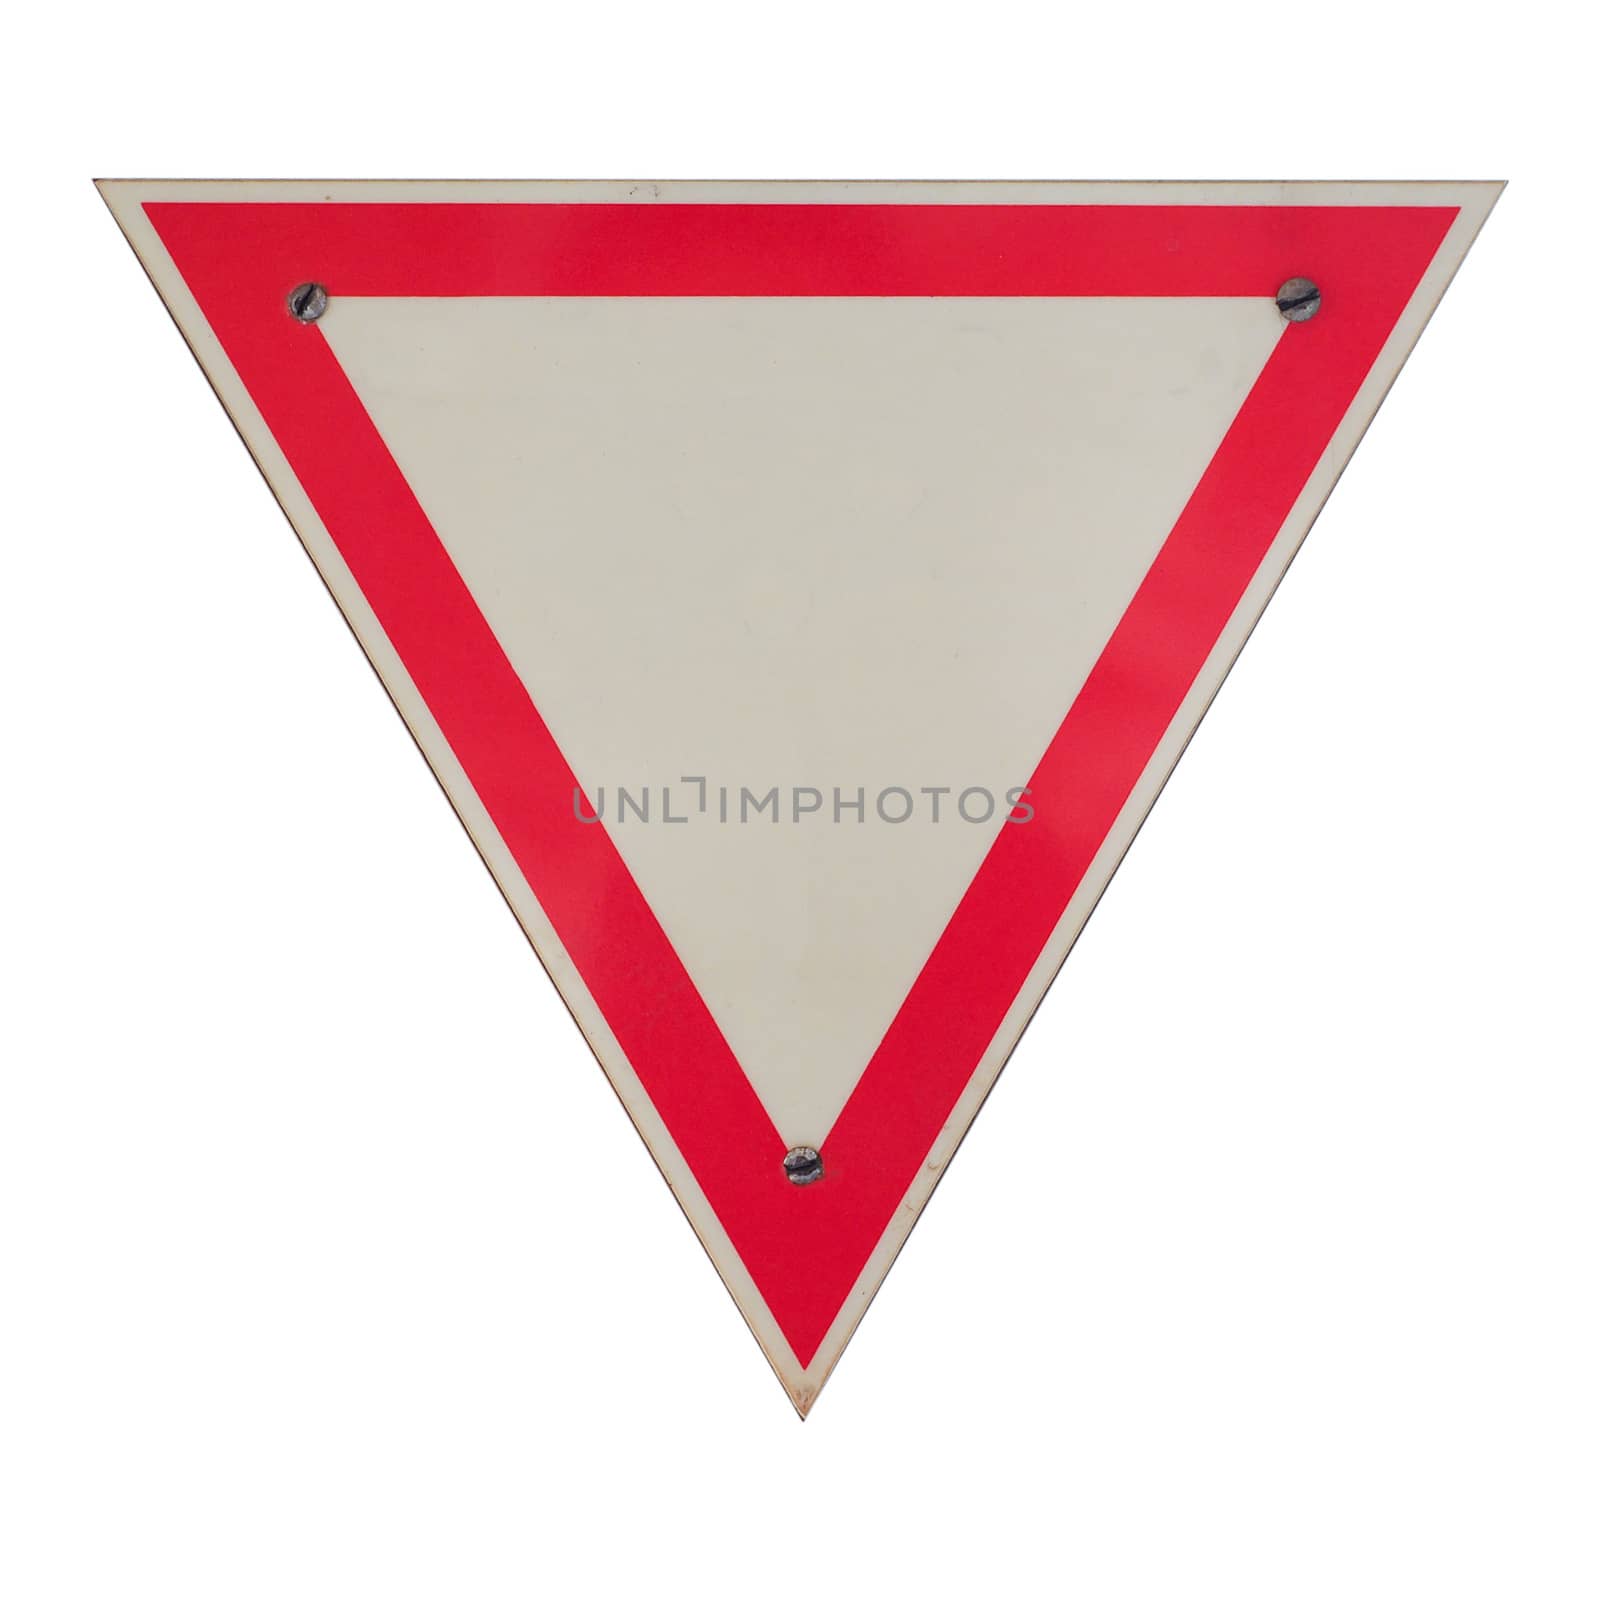 Regulatory signs, give way or yield traffic sign isolated over white background